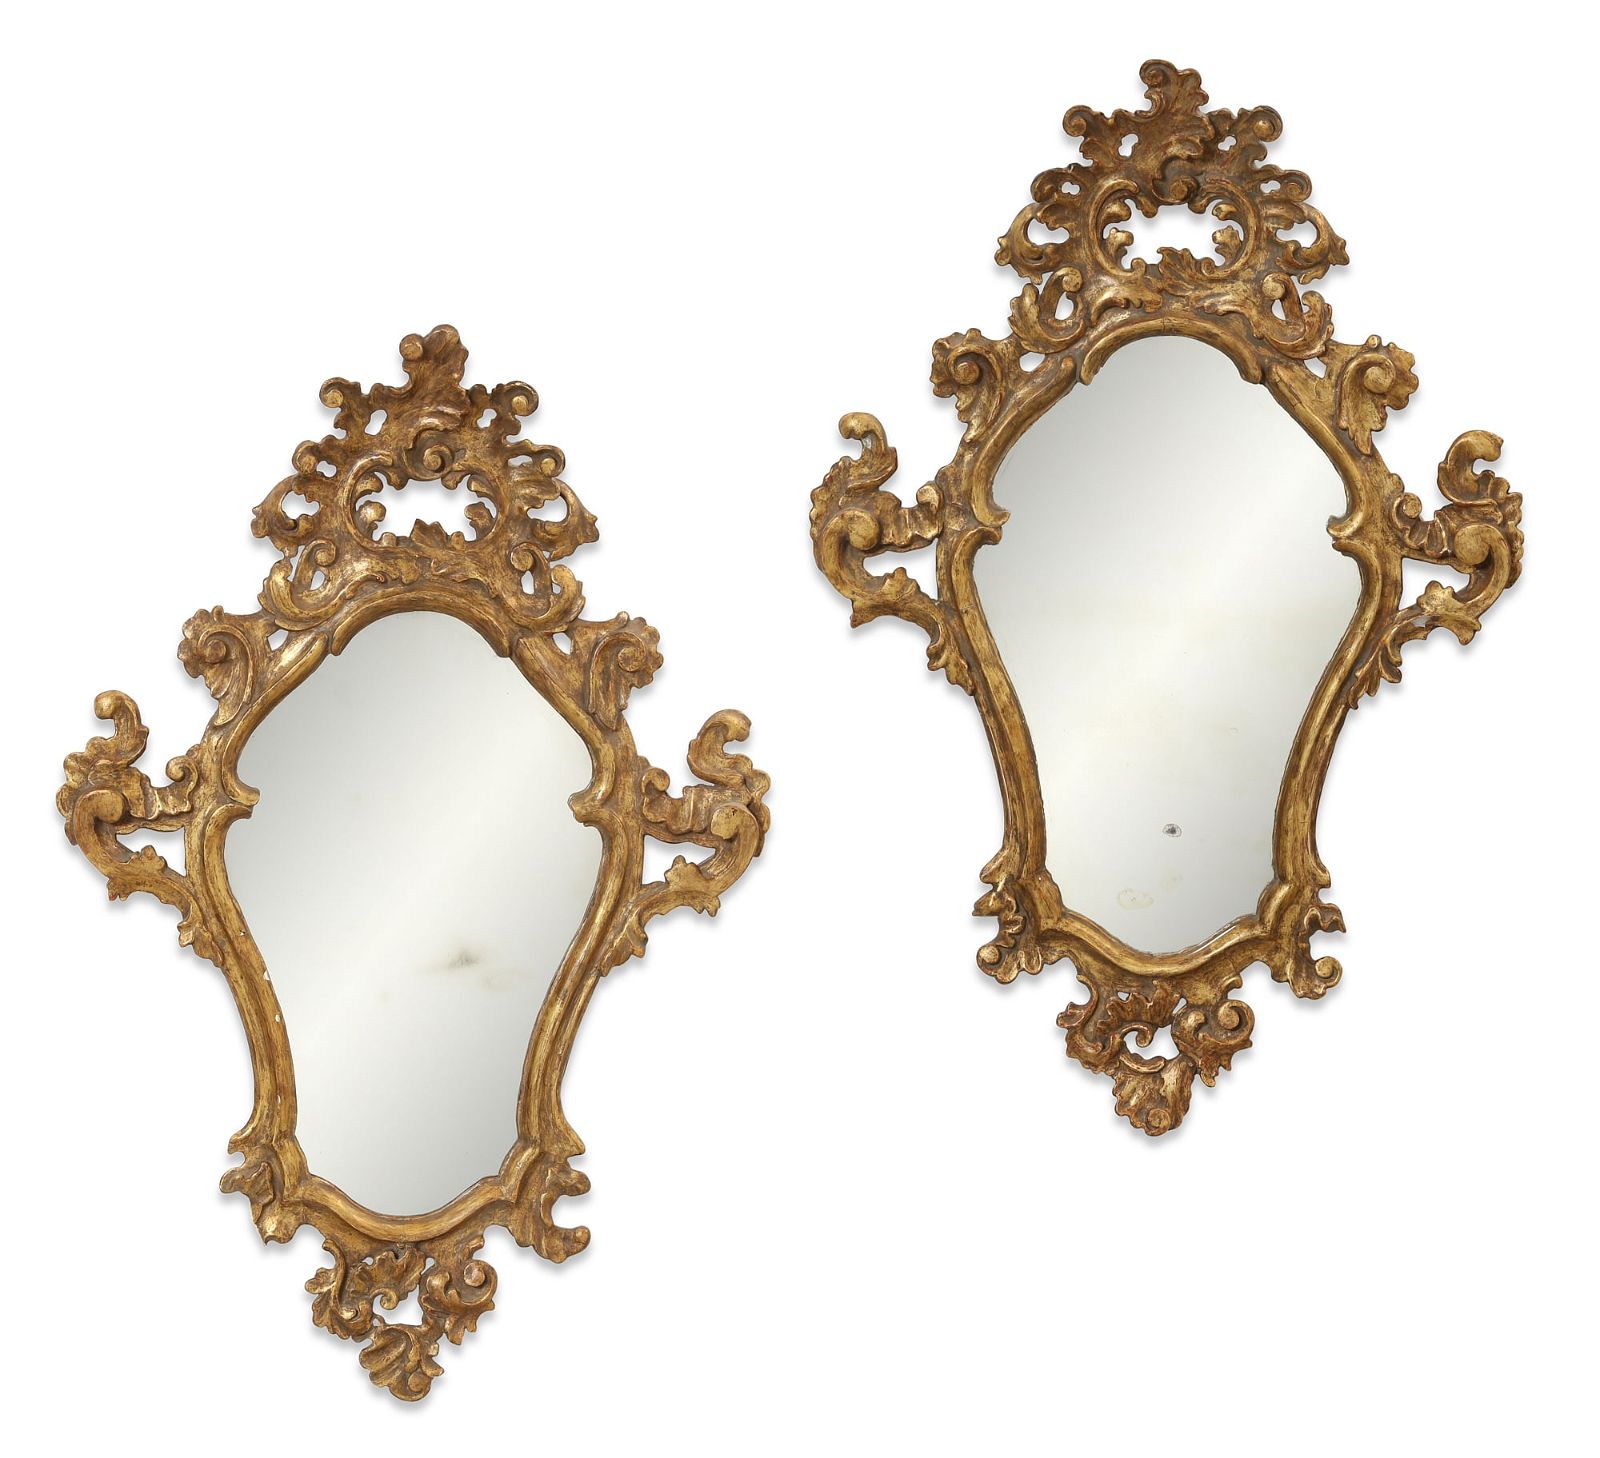 A PAIR OF VENETIAN ROCOCO STYLE